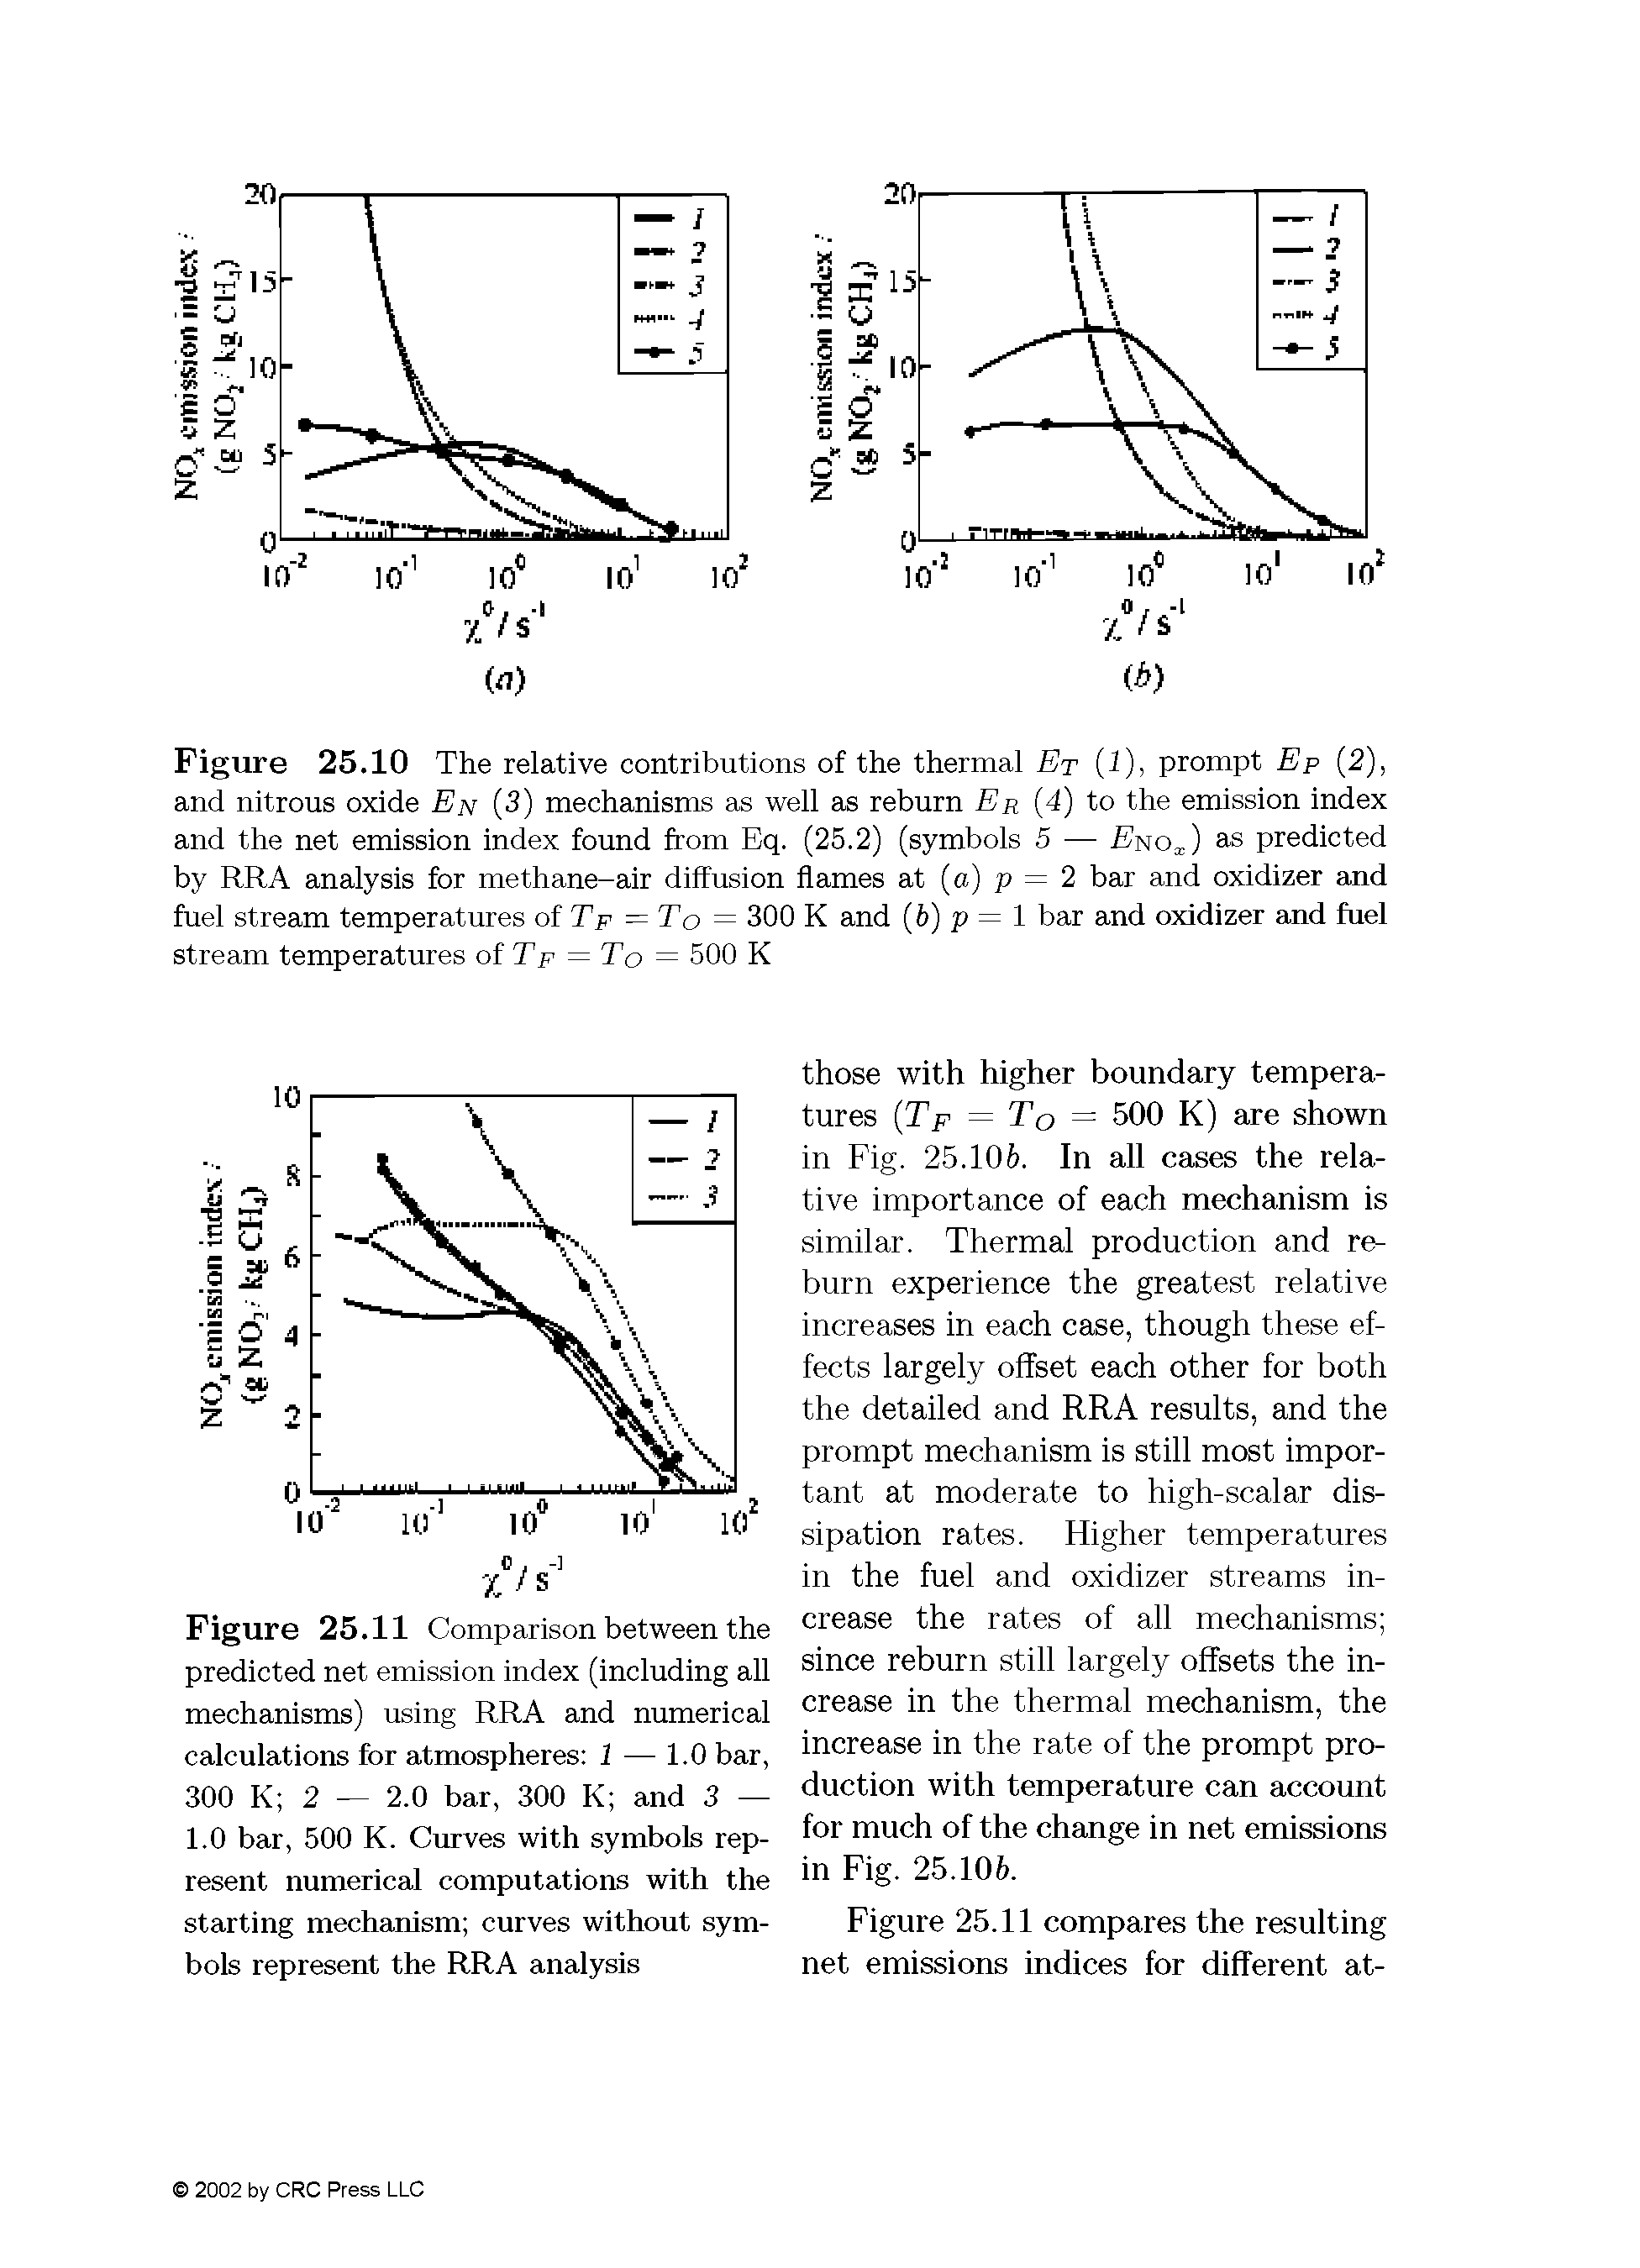 Figure 25.11 Comparison between the predicted net emission index (including all mechanisms) using RRA and numerical calculations for atmospheres 1 — 1.0 bar, 300 K 2 2.0 bar, 300 K and 3 — 1.0 bar, 500 K. Curves with symbols represent numerical computations with the starting mechanism curves without symbols represent the RRA analysis...